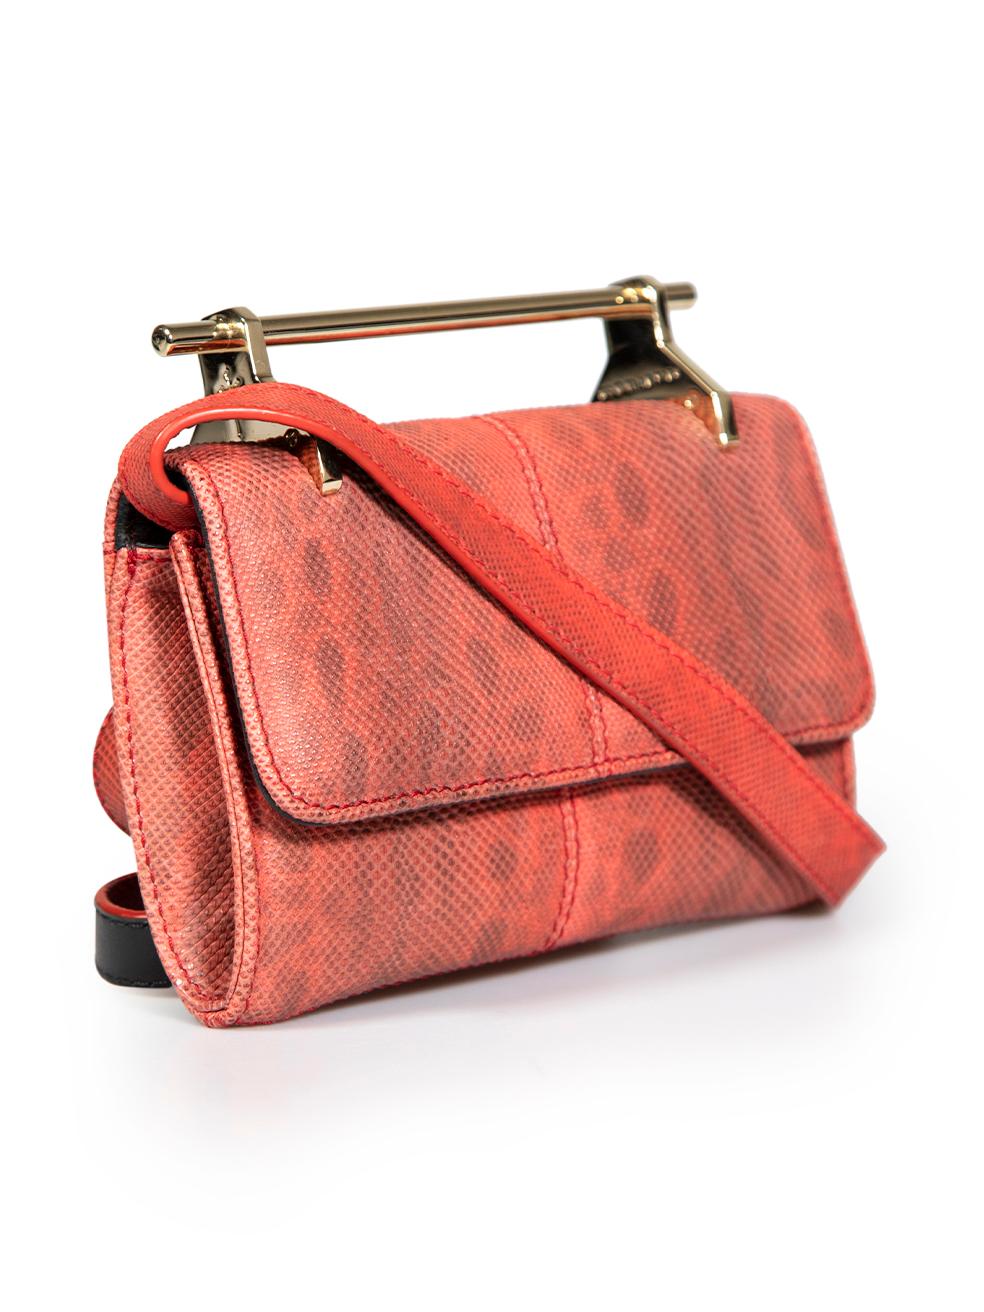 CONDITION is Very good. Minimal wear to bag is evident. Tarnishing to metal hardware on this used M2Malletier designer resale item.
 
 
 
 Details
 
 
 Red
 
 Leather
 
 Mini top handle bag
 
 Animal print
 
 Lizard embossed
 
 Gold tone hardware
 
